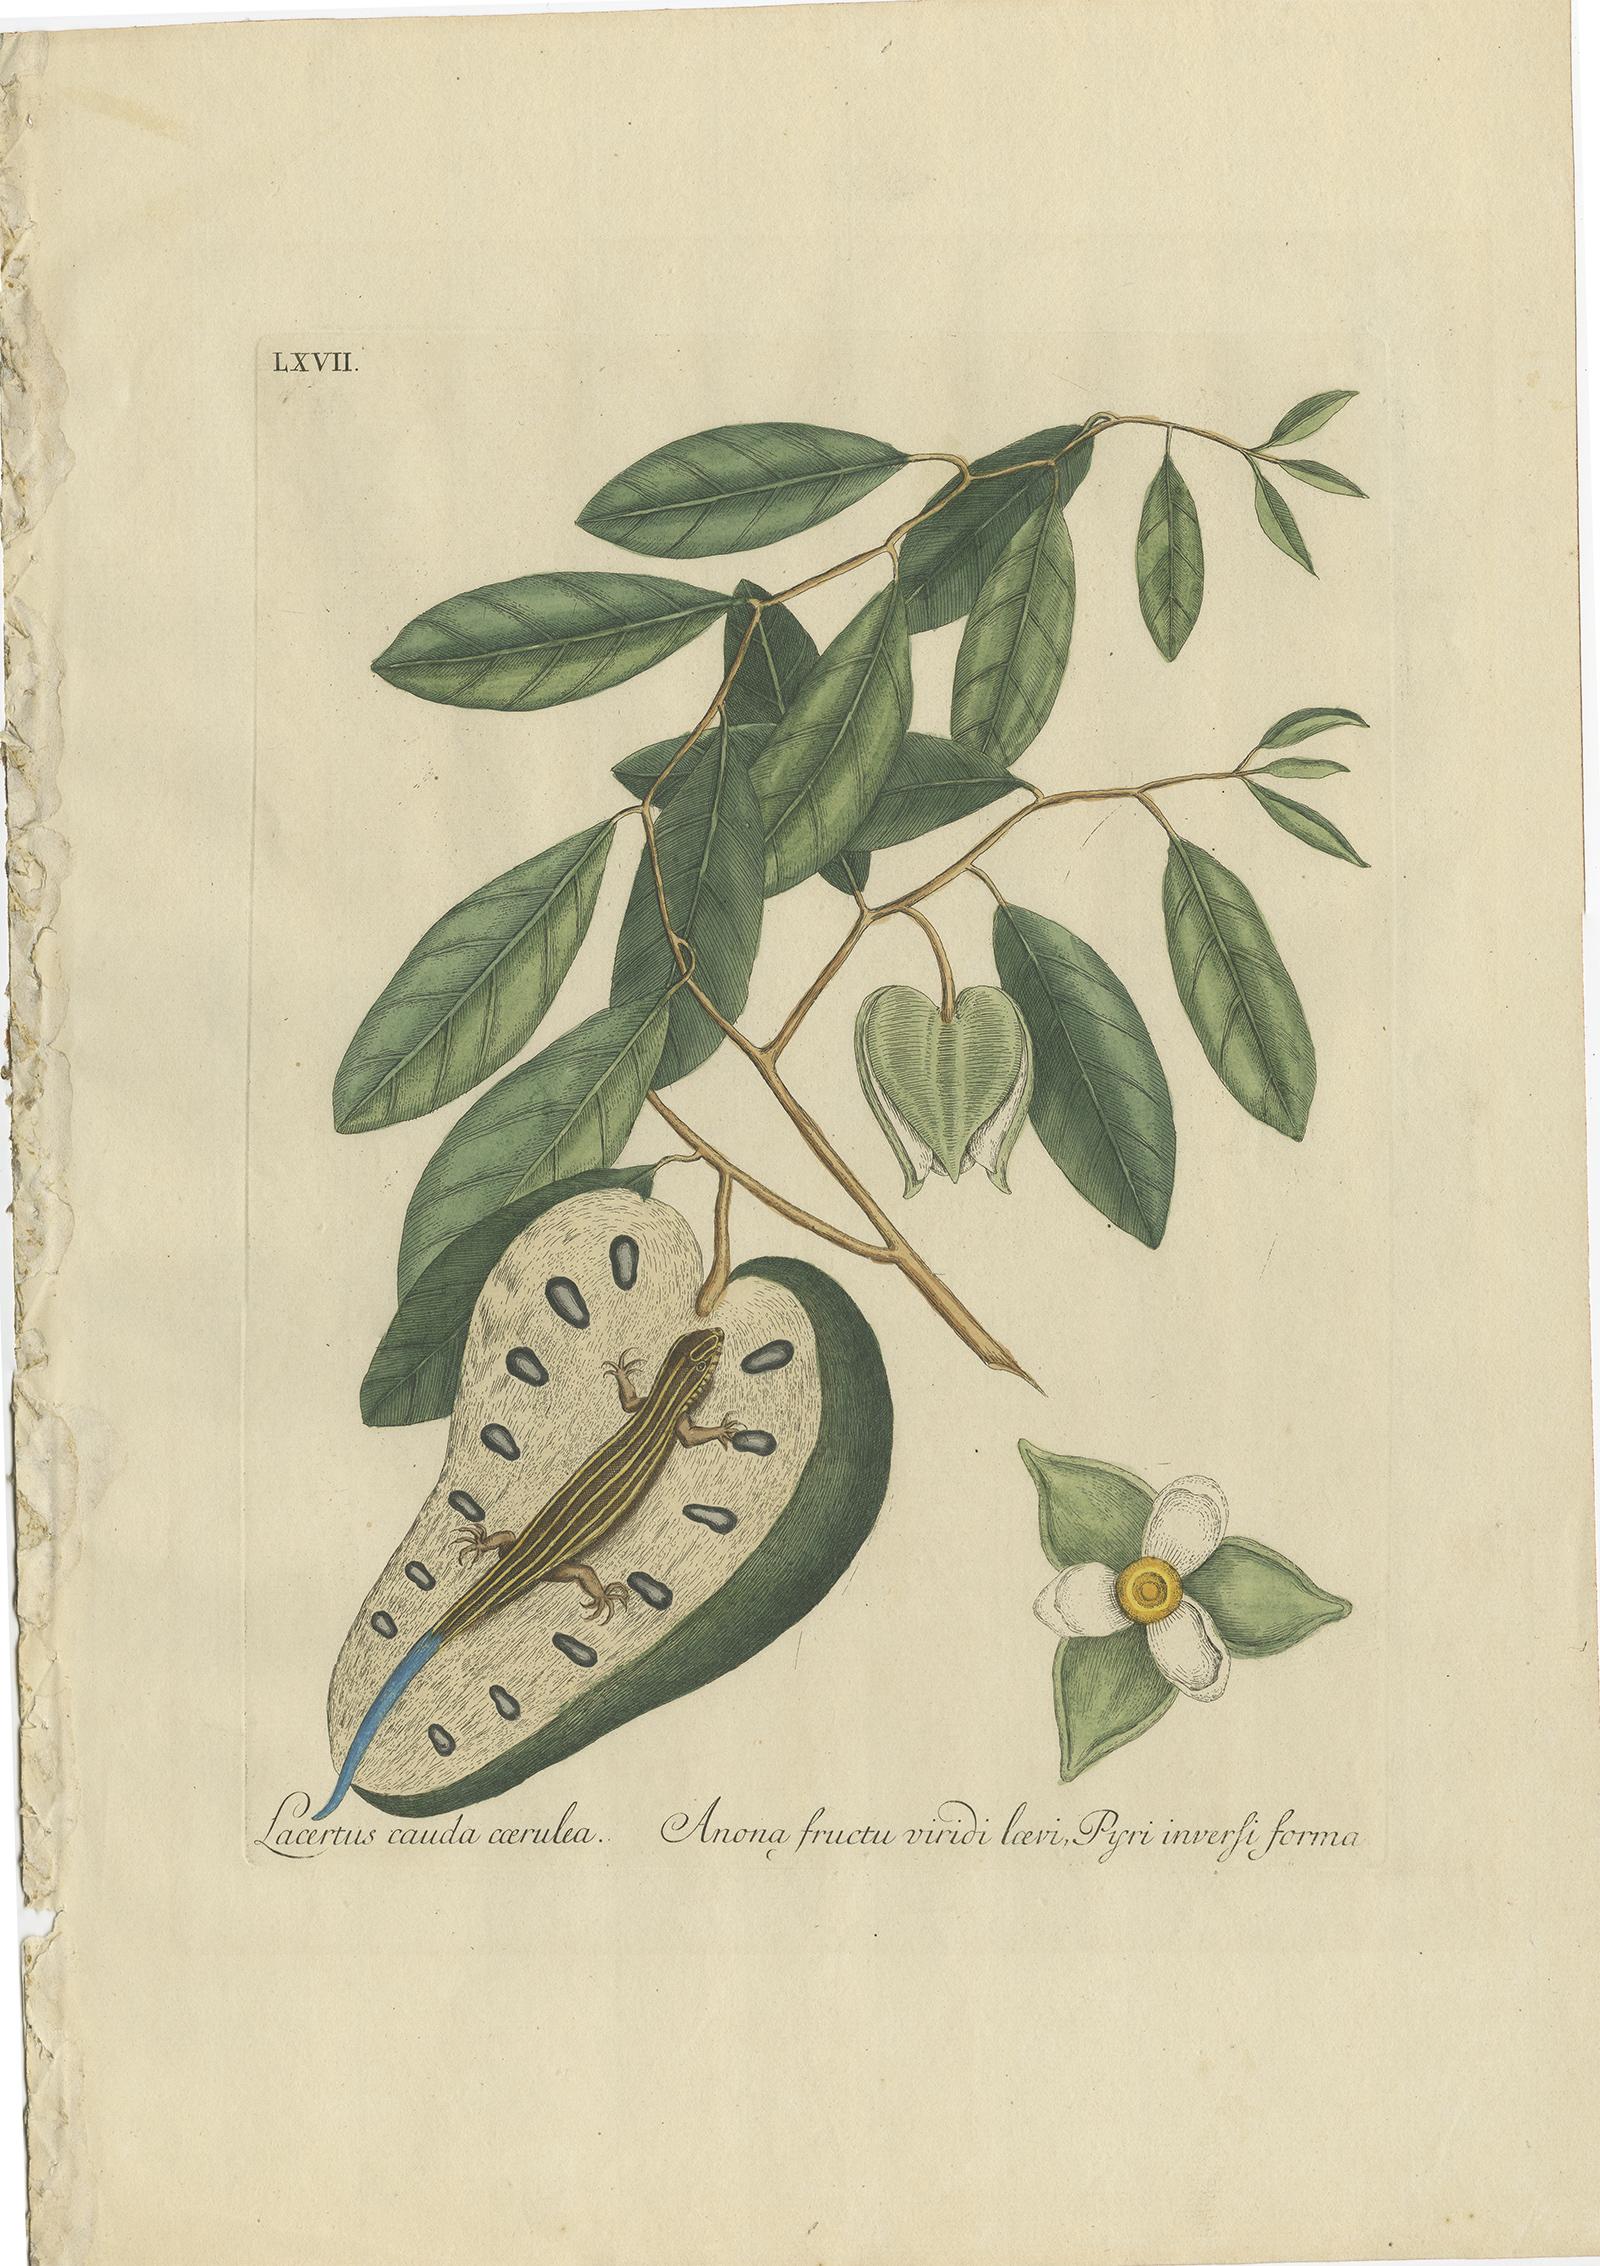 The set of two antique prints includes 'Sciurus volans, Guajacana' featuring a flying squirrel and 'Lacertus cauda coerulea, Anona fructa viridi loevi Pyri inversi forma,' depicting a blue-tail lizard. These prints are sourced from 'Piscium,